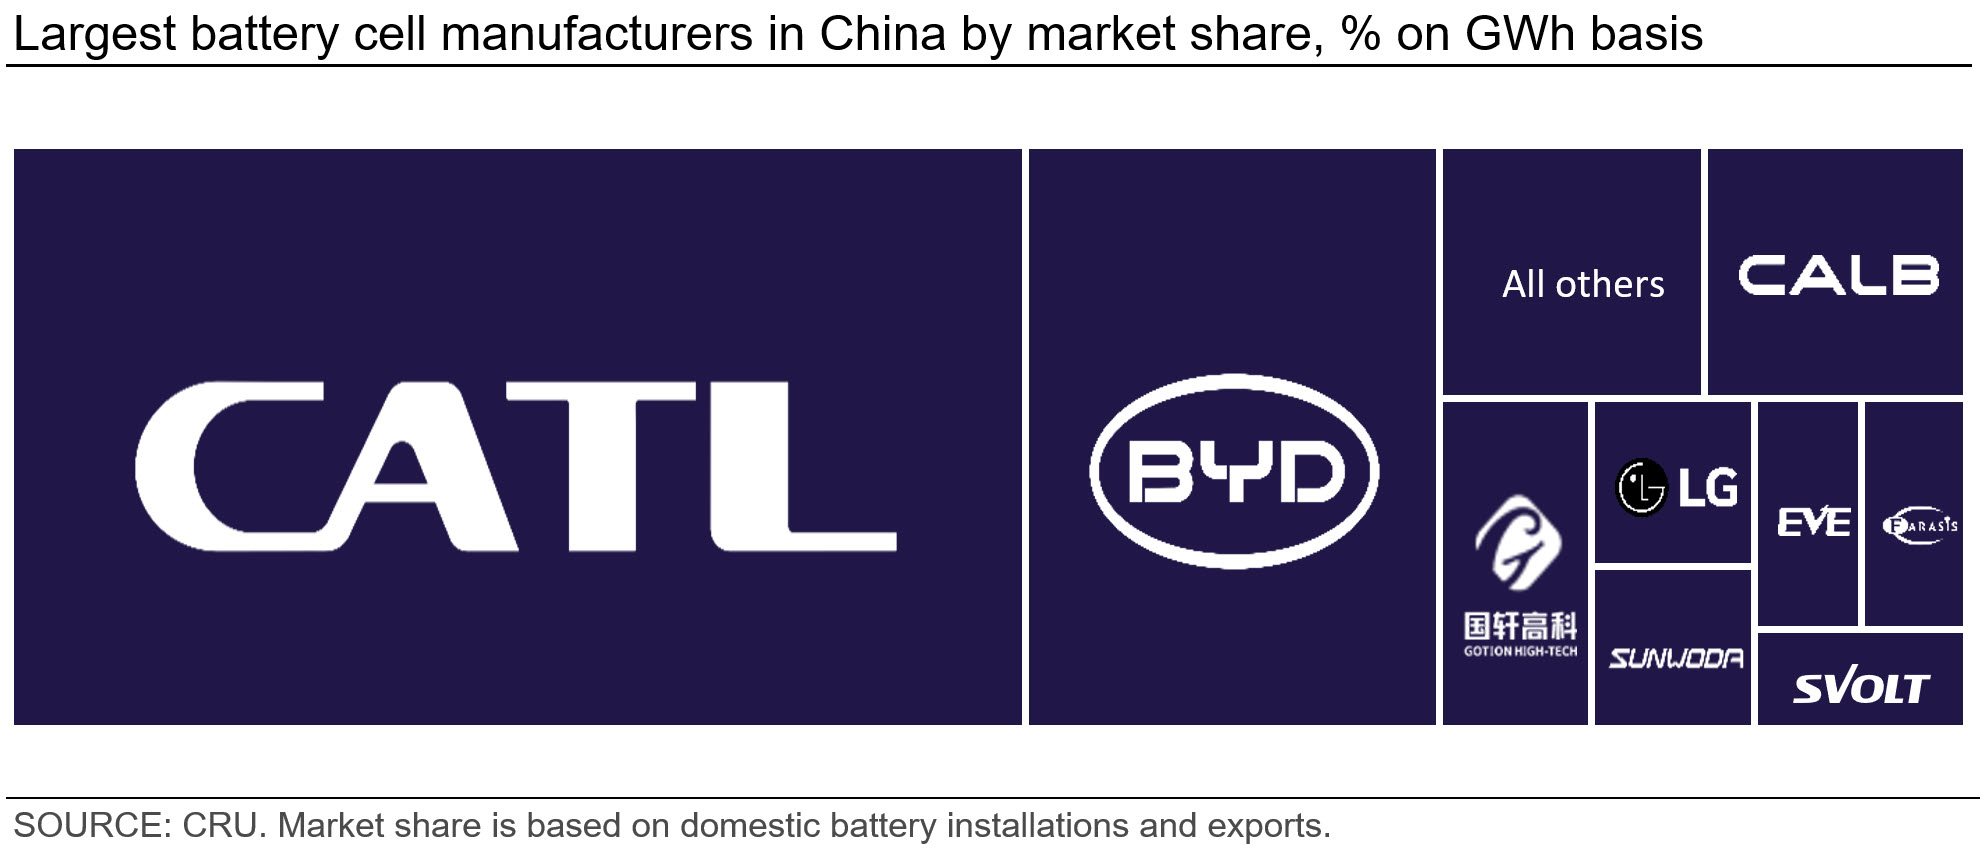 Battery cell manufacturers in China (CATL, BYD, etc.)